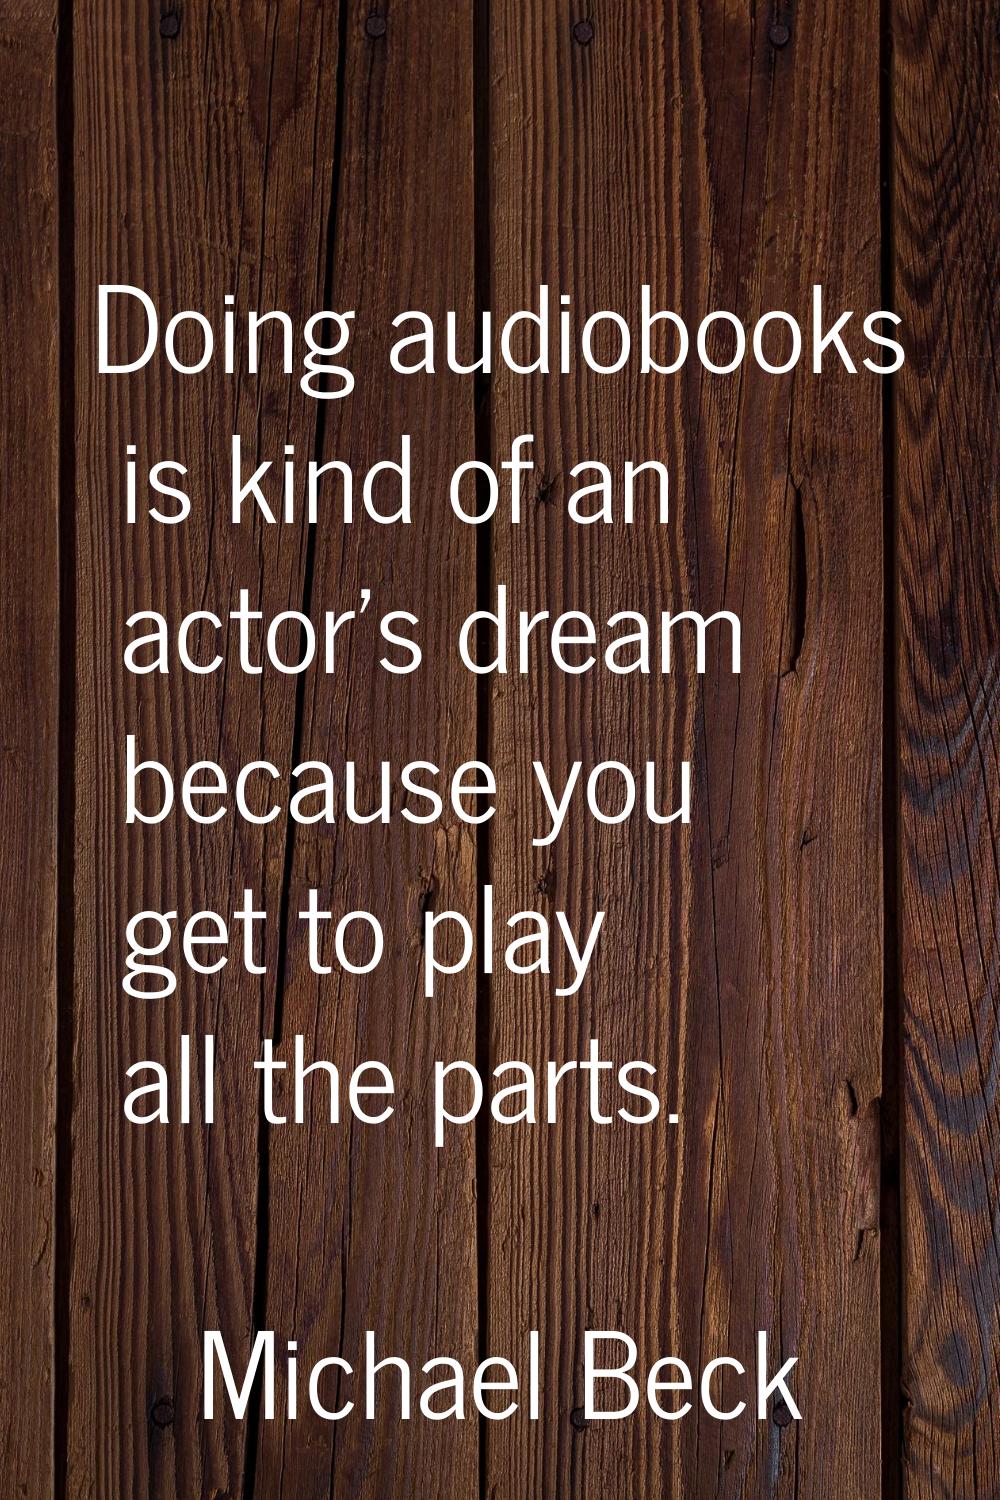 Doing audiobooks is kind of an actor's dream because you get to play all the parts.